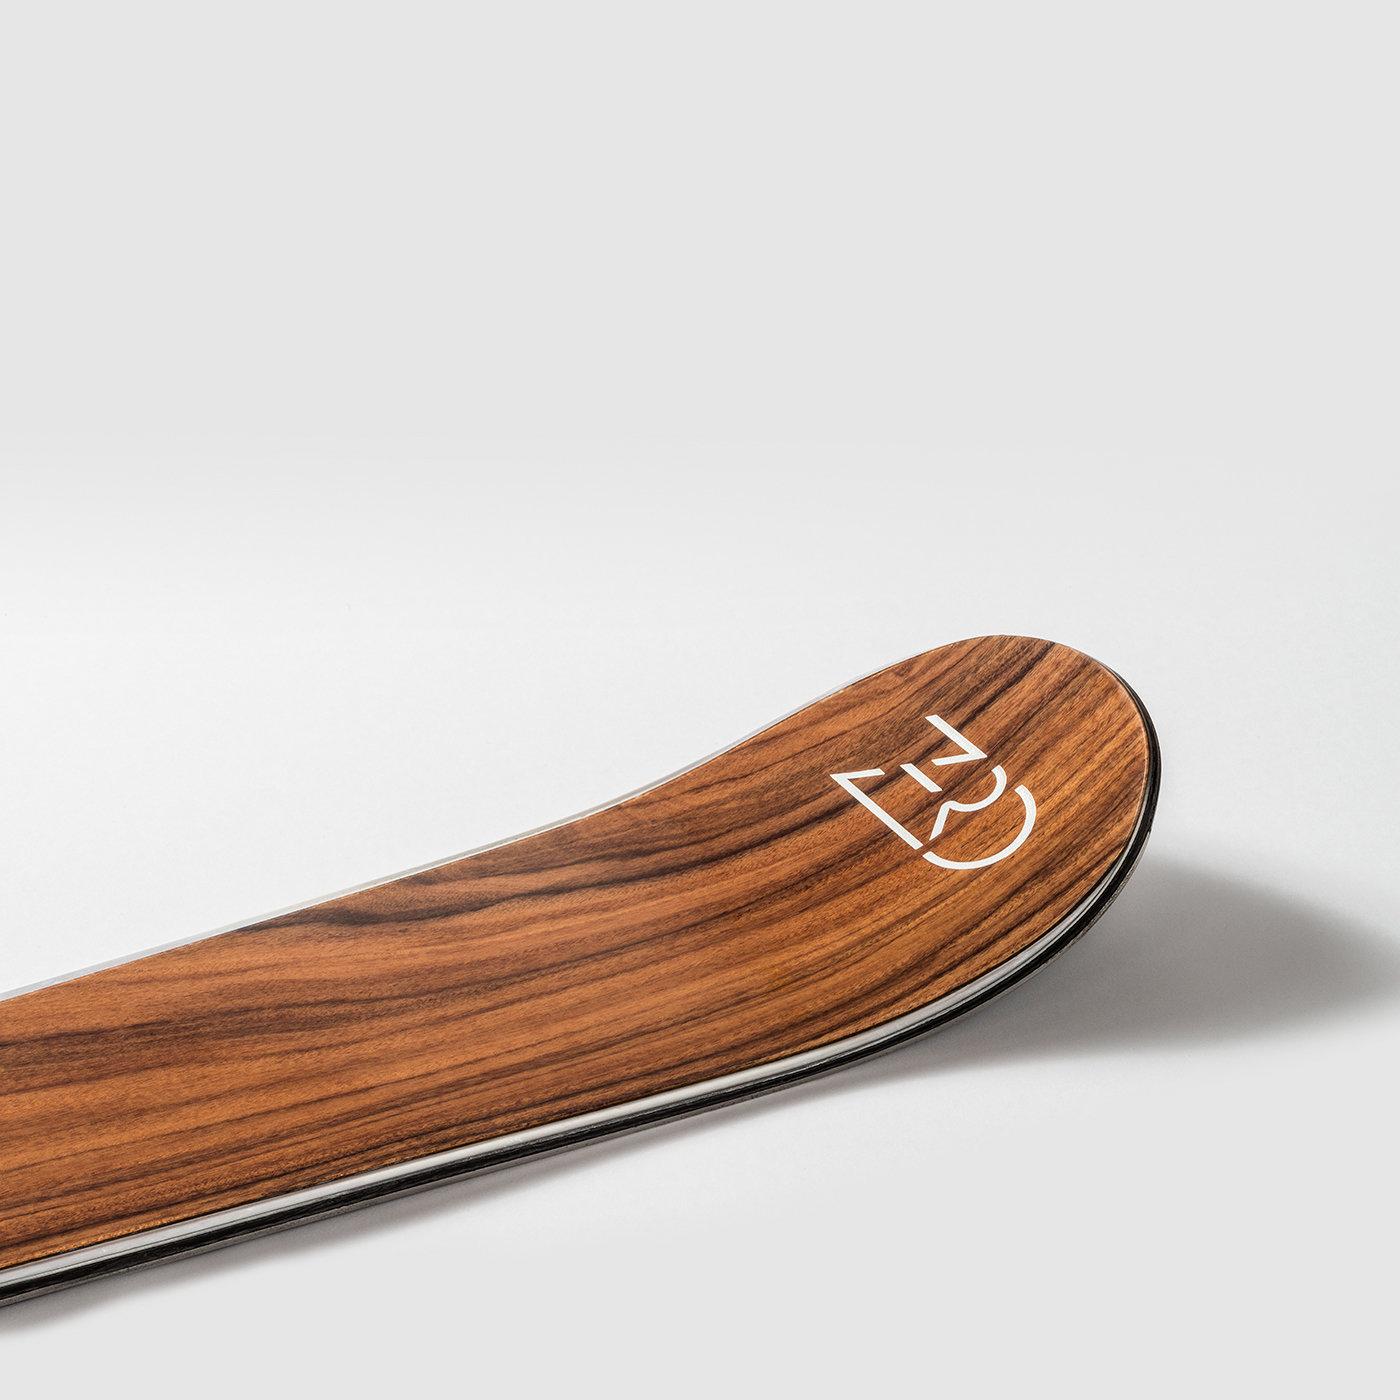 Technology and design merge in Zero's unique high-performing skis that embody a new style of skiing. A stunning piece of craftsmanship with an elegant and timeless look, the Lignum skis feature an internal core of okoume wood with an external layer